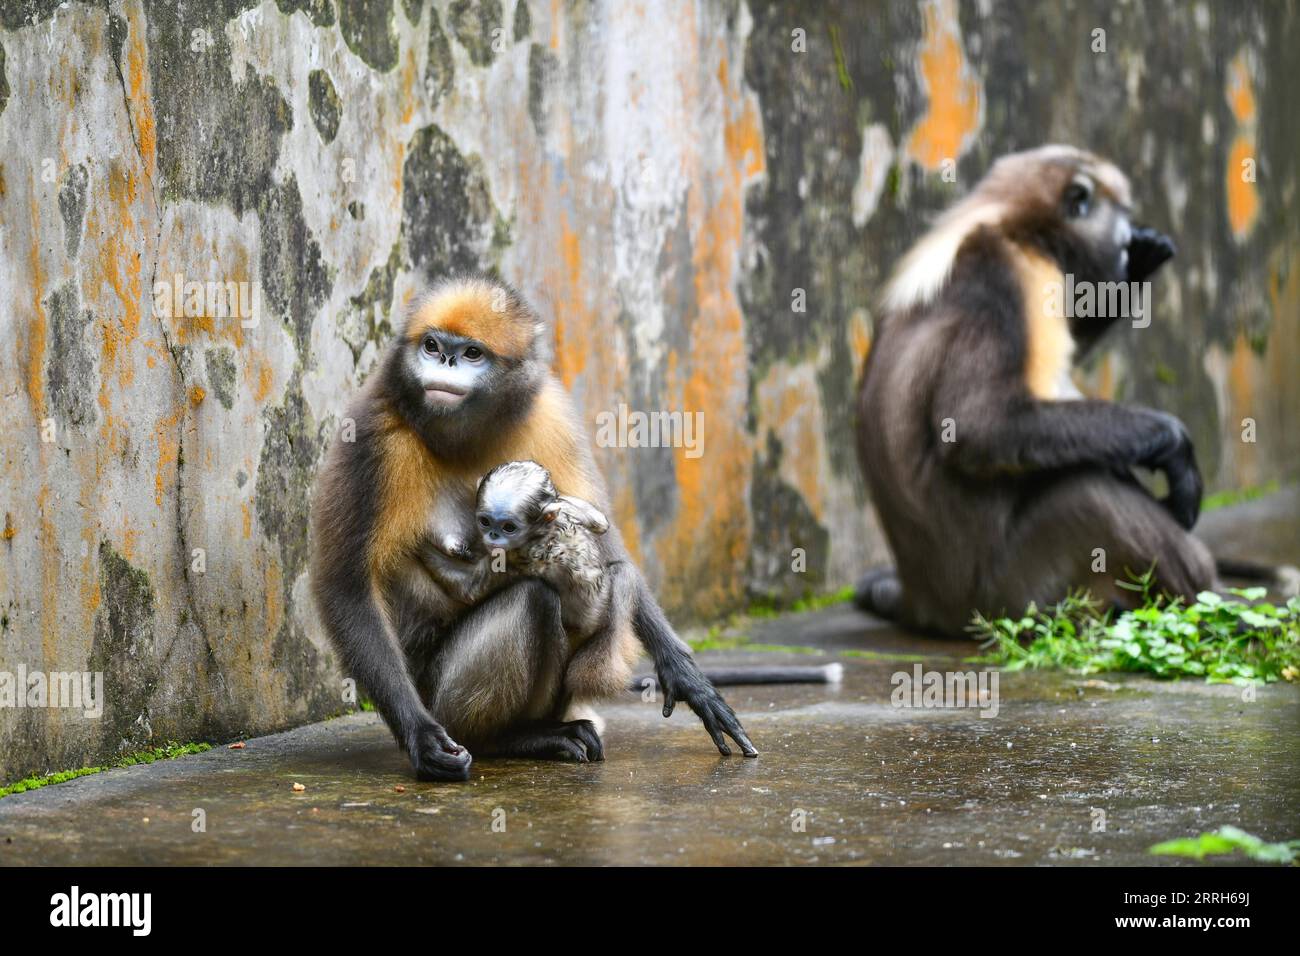 220616 -- TONGREN, June 16, 2022 -- Guizhou snub-nosed monkeys are seen with a cub in a wildlife rescue center of Fanjingshan National Nature Reserve in southwest China s Guizhou Province, June 16, 2022. A Guizhou snub-nosed monkey cub was born on April 13 and has been raised in the wildlife rescue center of Fanjingshan National Nature Reserve. The Guizhou snub-nosed monkey, or Guizhou golden monkey, is under top-level protection in China and is listed as an endangered species by the International Union for Conservation of Nature. Among the three species of golden snub-nosed monkeys endemic to Stock Photo